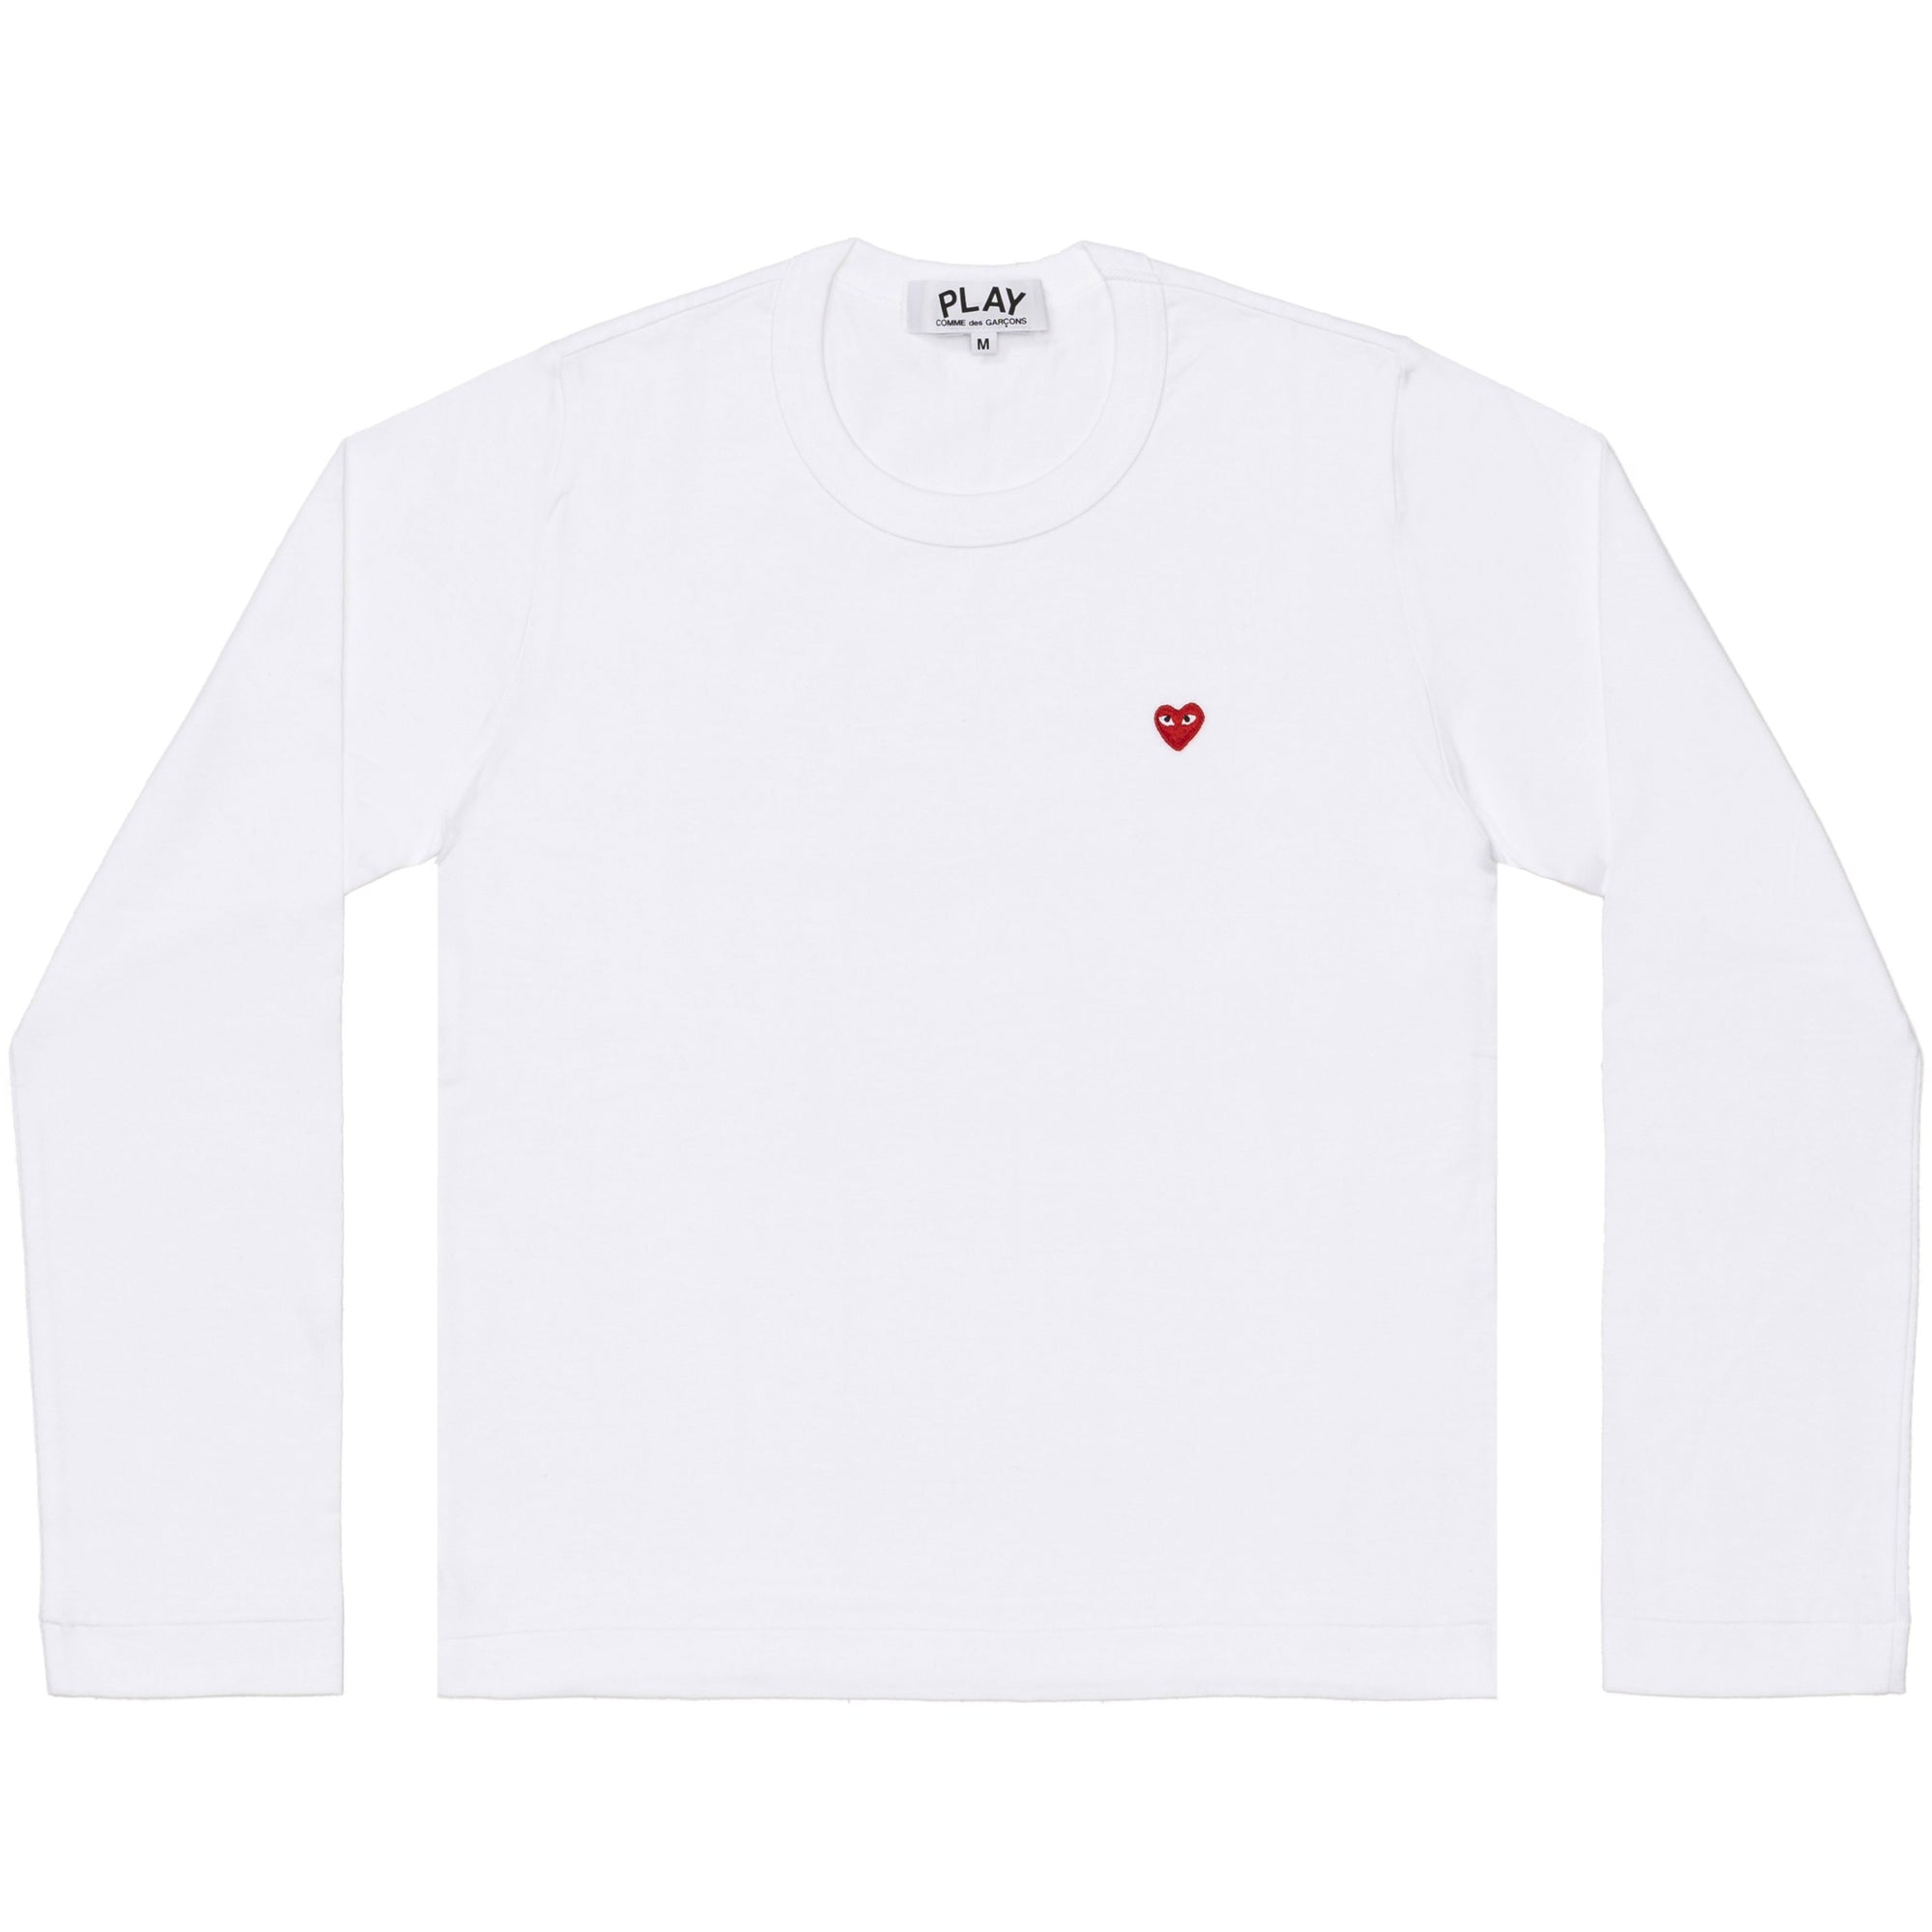 PLAY CDG - T-SHIRT WITH SMALL RED HEART - (WHITE) view 1